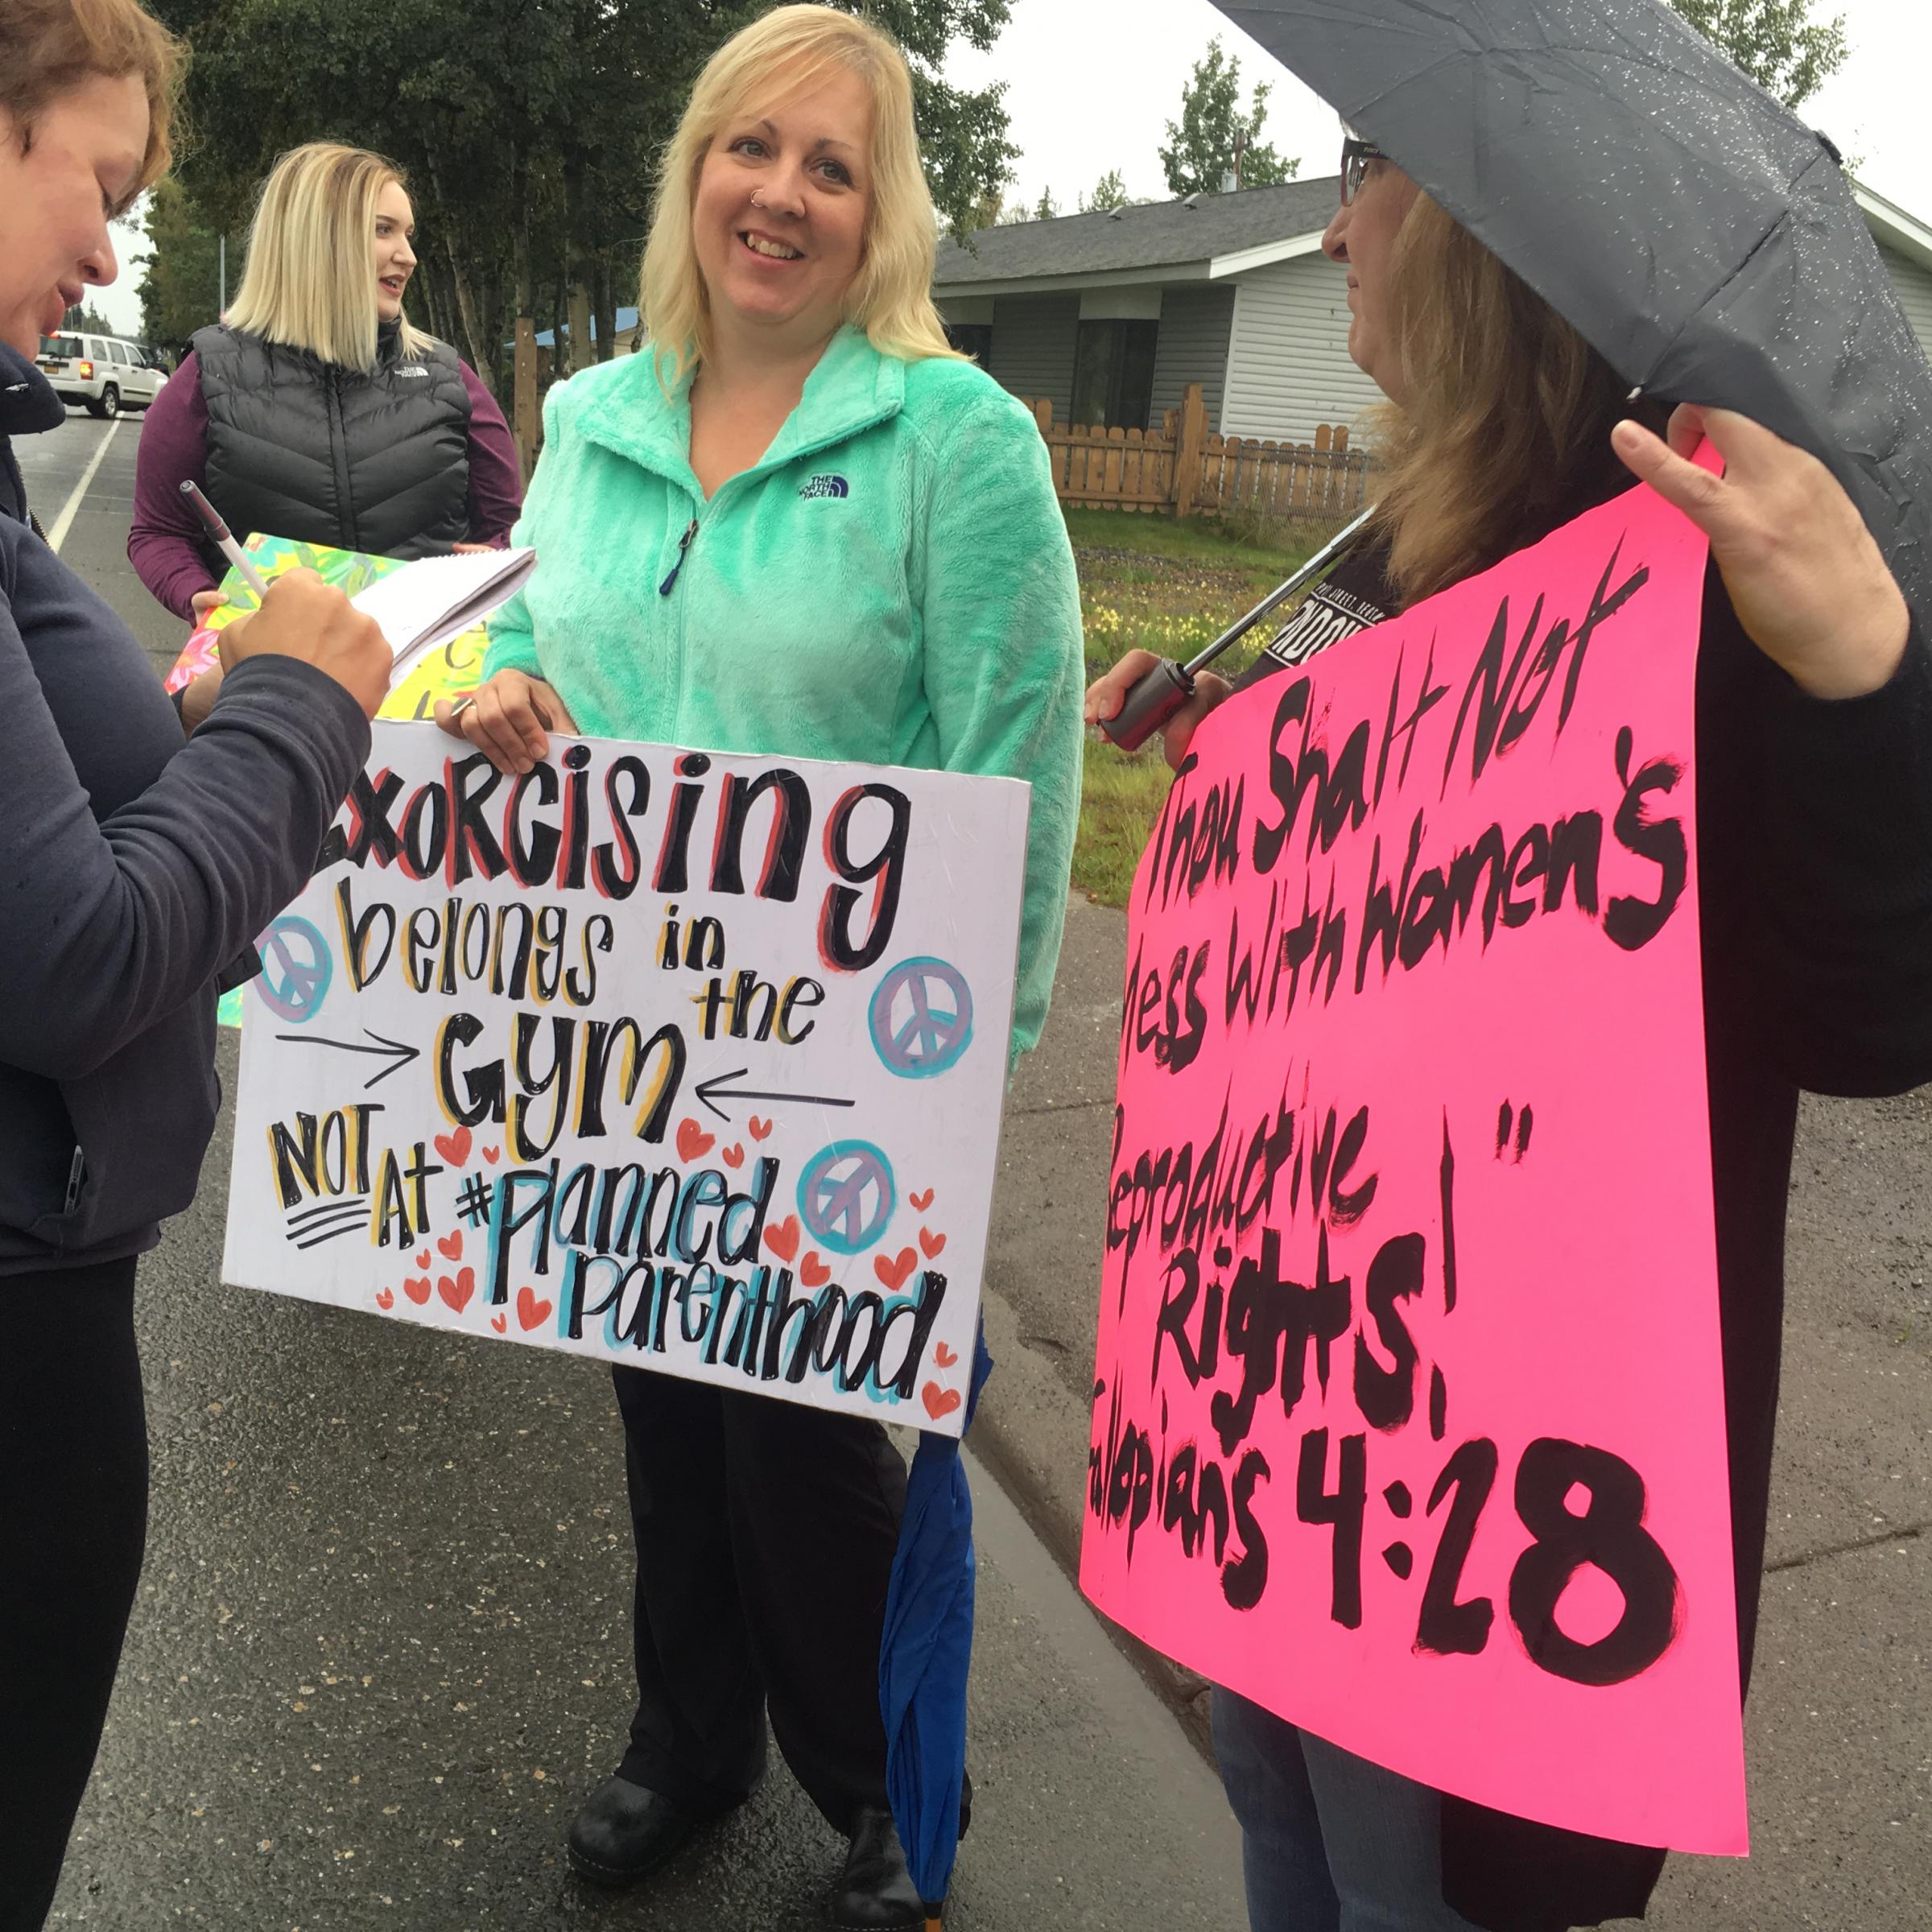 Reporter Elizabeth Earl with the Peninsula Clarion Newspaper interviews counterprotesters in front of the Soldotna Planned Parenthood on Aug. 17. (Photo by Daysha Eaton, KBBI - Homer)